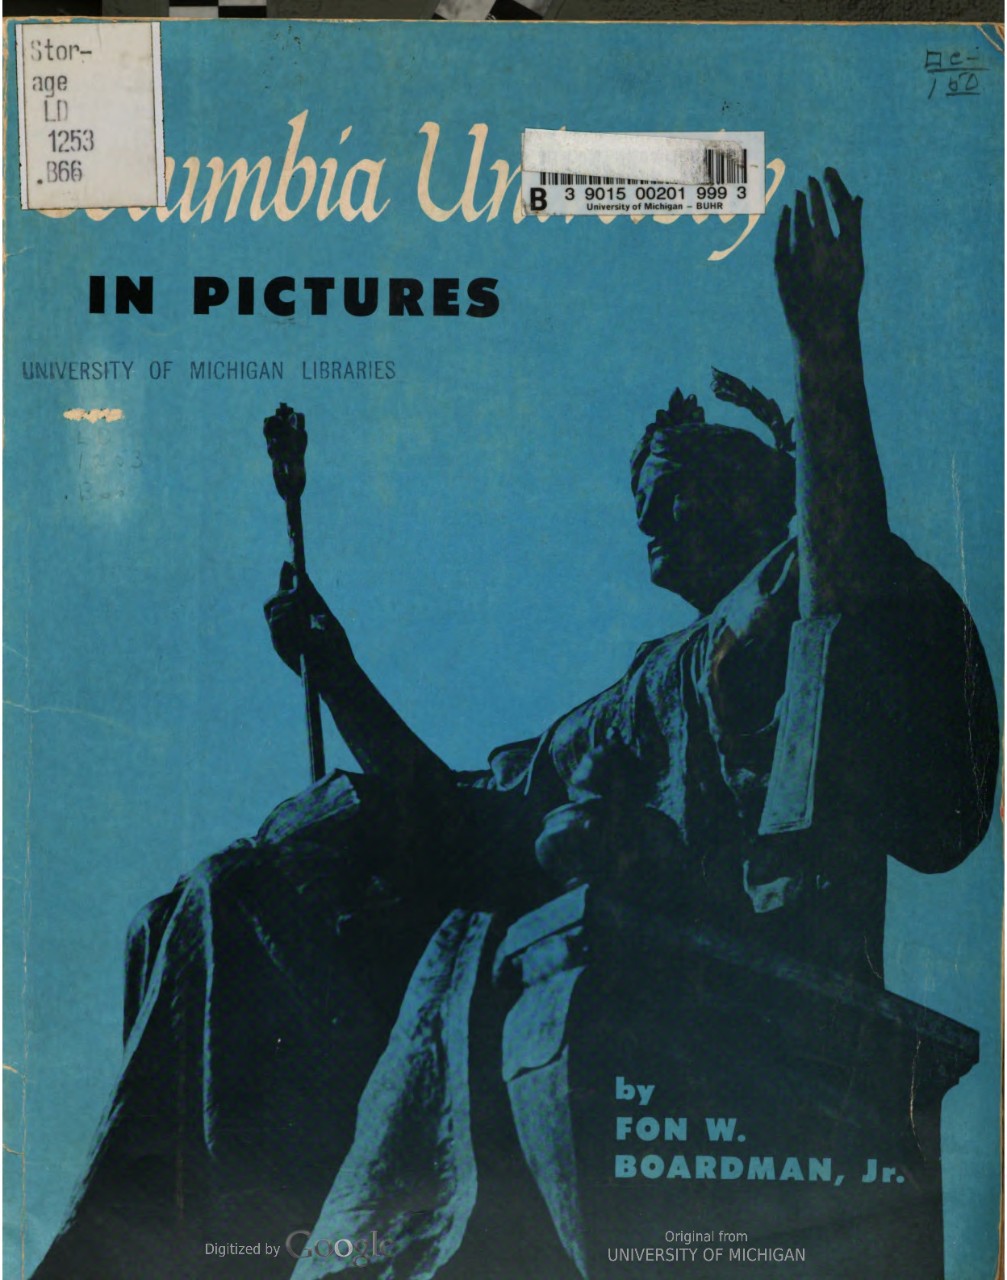 Columbia University in Picture bookcover, 1954.